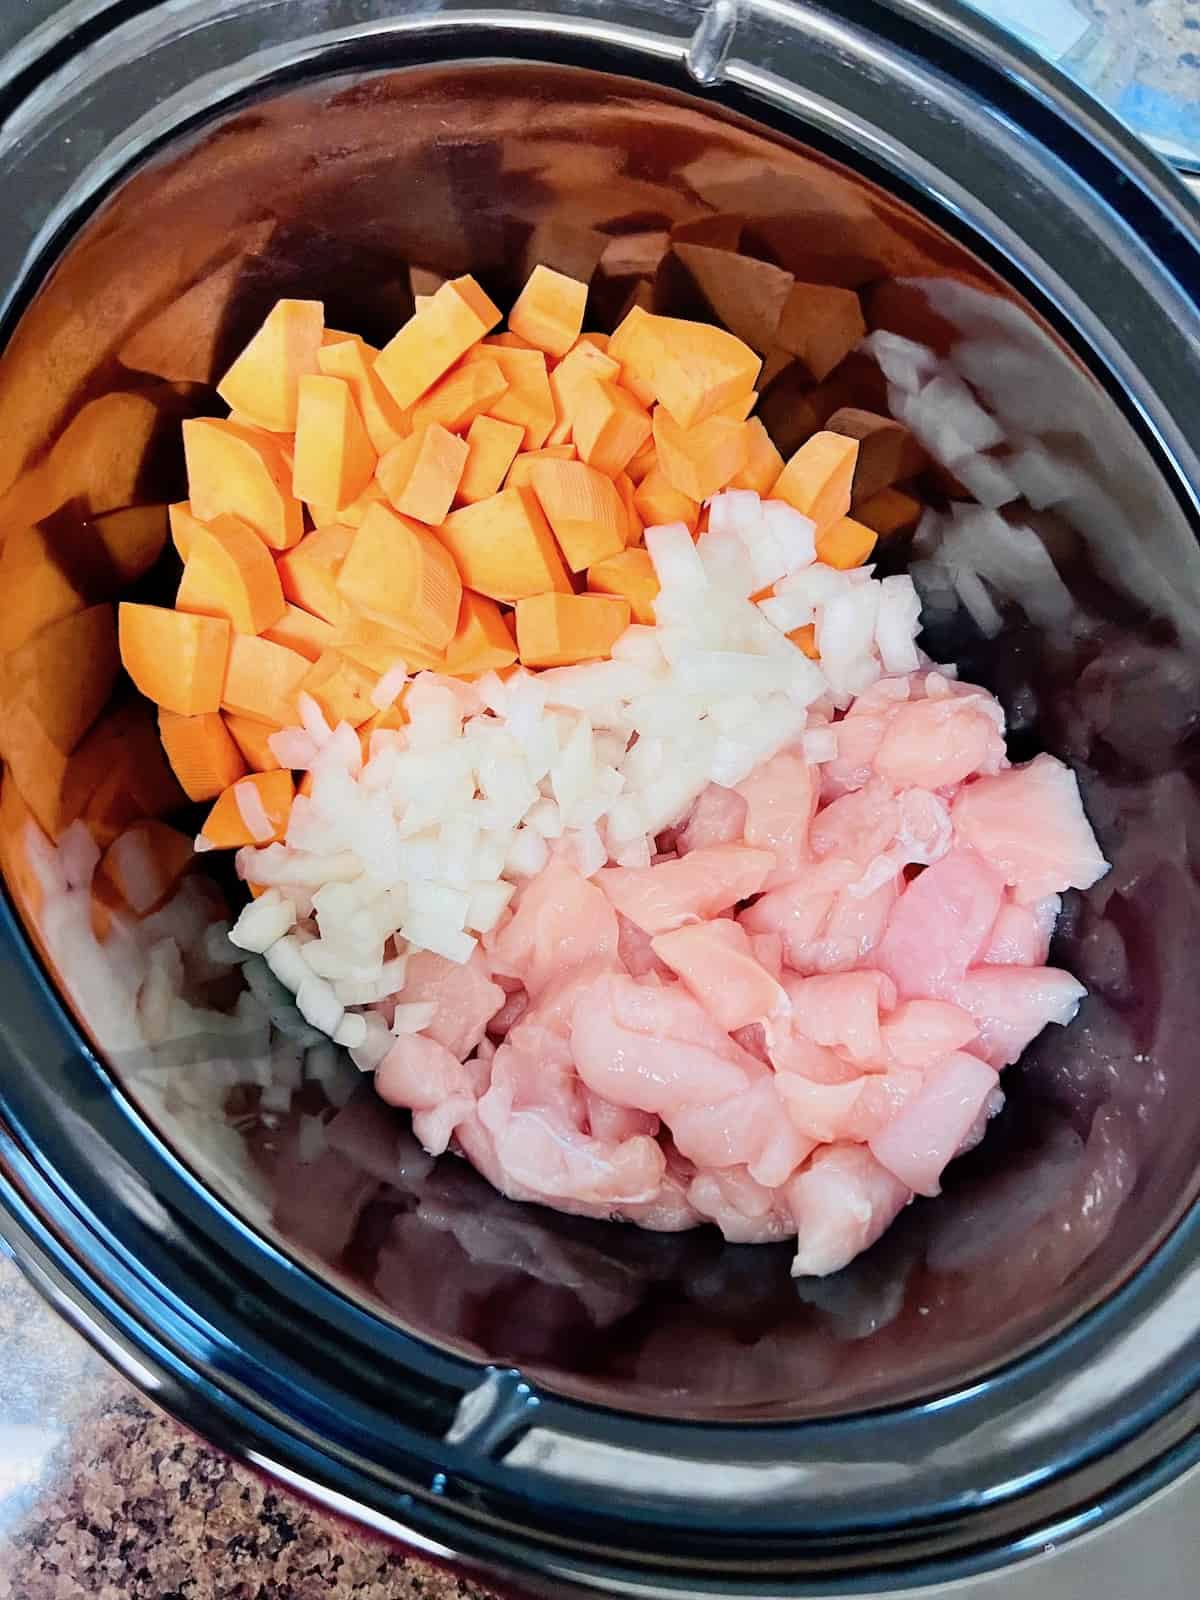 Sweet potatoes onions and diced chicken lined up in crockpot insert.